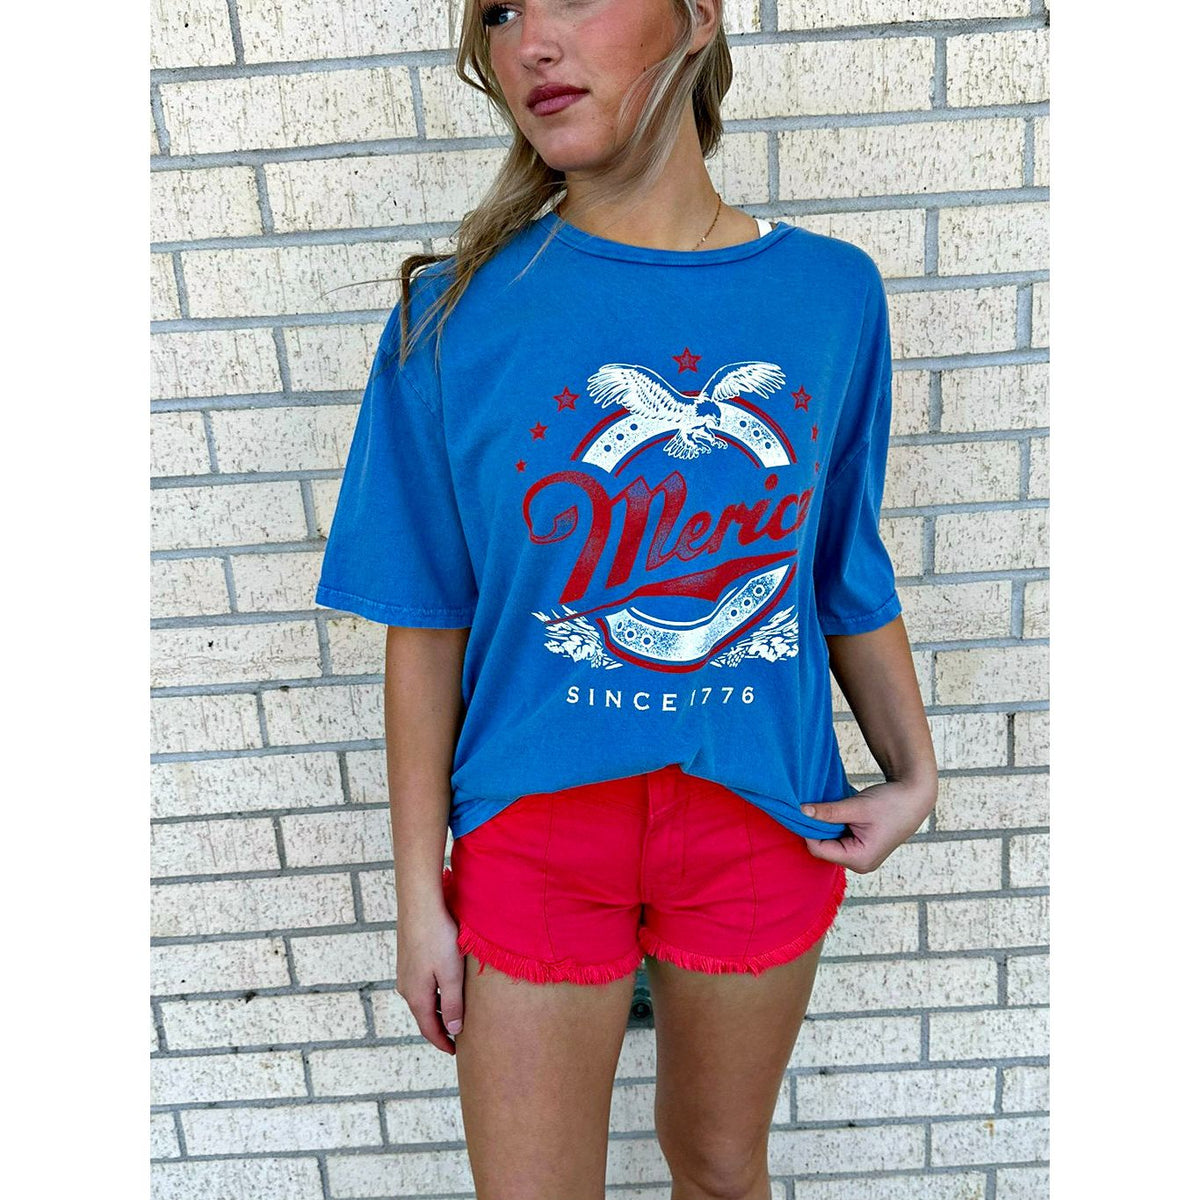 Merica Blue Mineral Wash oversized Tee